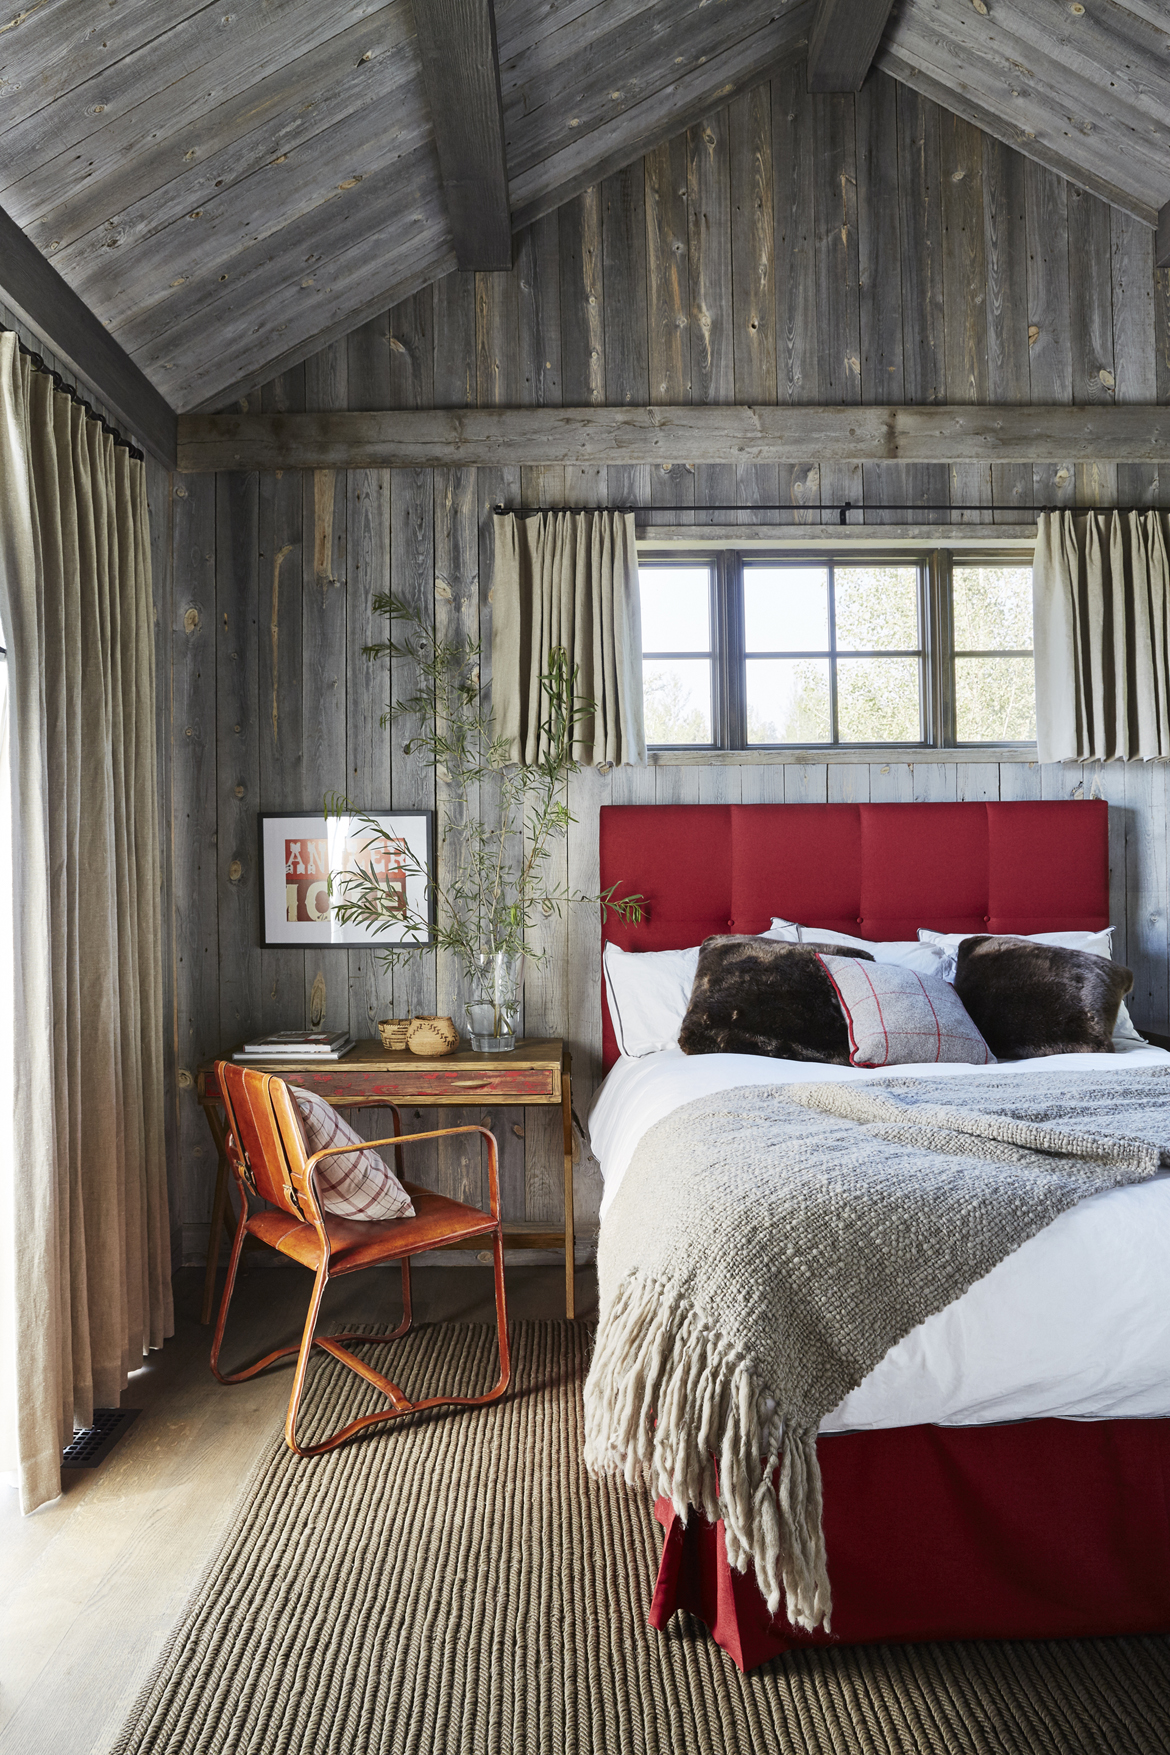 A surprising scarlet tufted headboard and bed skirt add a bold stroke of drama to patinaed wood walls in one of the guest cottage bedrooms by WRJ Design (photo by William Abranowicz).